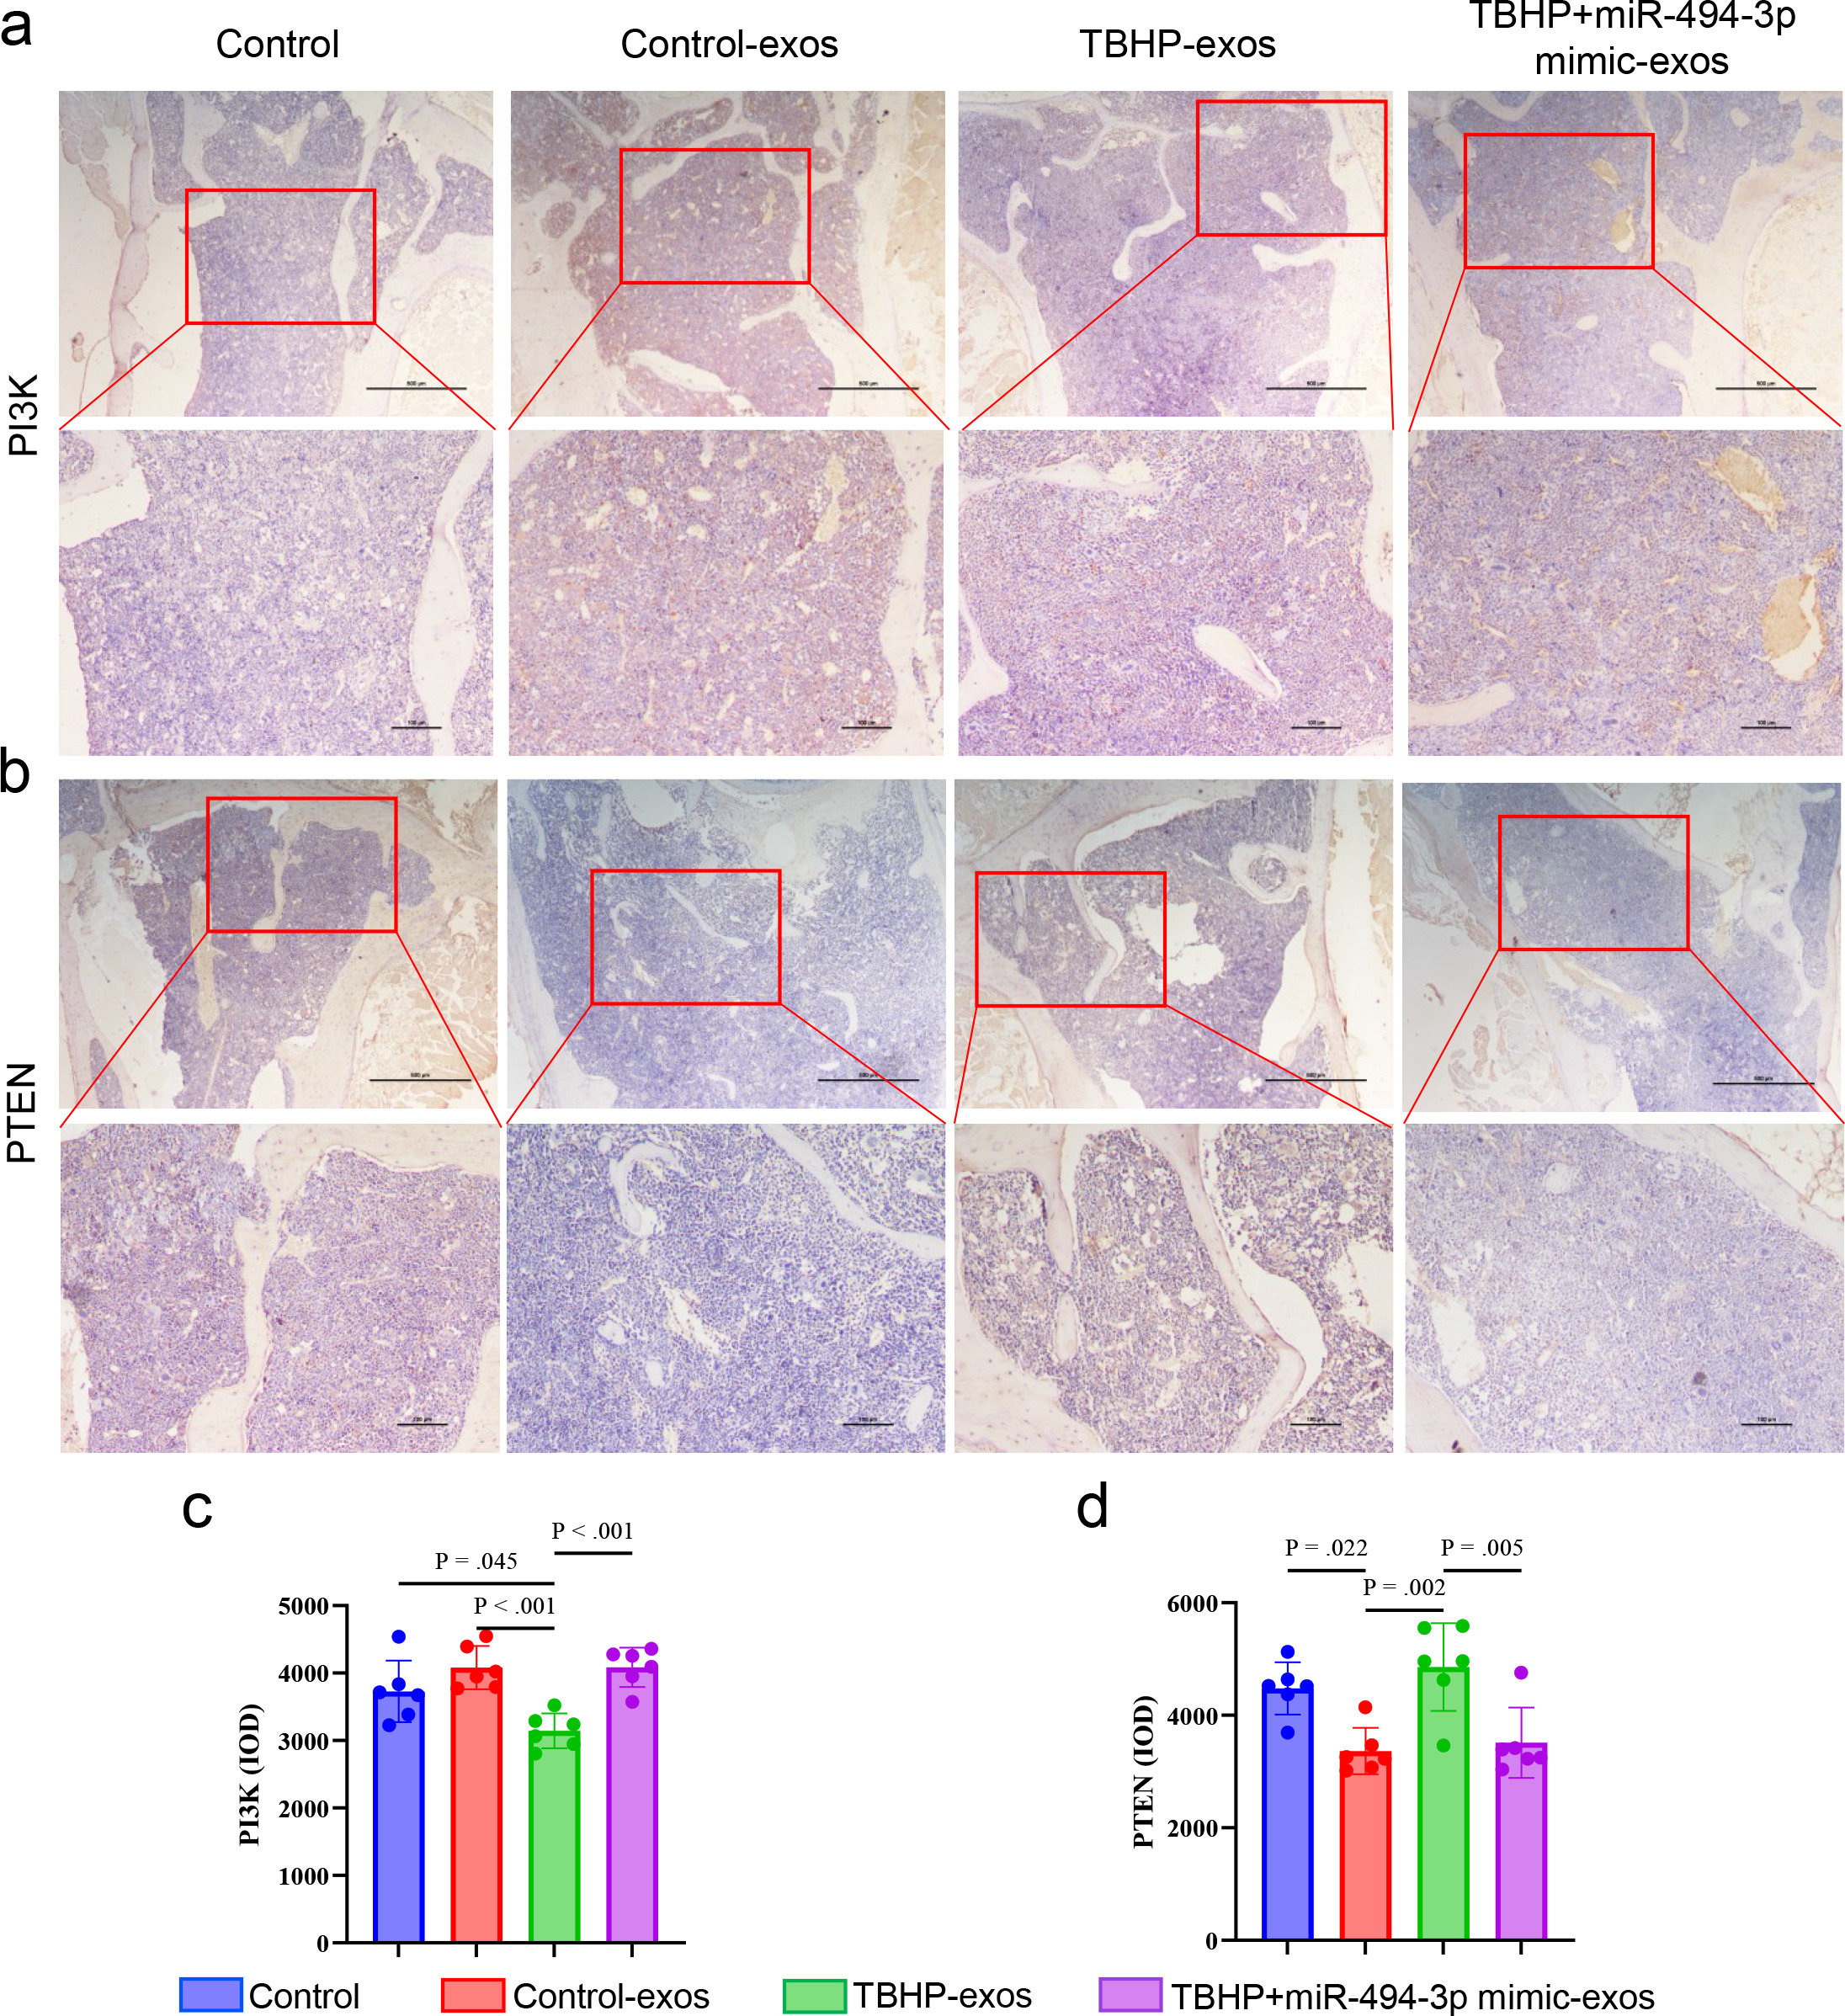 Fig. 5 
            Immunohistochemical staining and quantitative analysis for: a) and c) phosphoinositide 3-kinase (PI3K); and b) and d) phosphatase and tensin homolog (PTEN) of distal femoral metaphysis from SAMP6 mice treated with different exosomes. Scale bar = 500 μm in 4× objective lens. Scale bar = 100 μm in 10× objective lens. Data are shown as column charts and the p-values were calculated by one-way analysis of variance with Sidak’s multiple comparison tests. The p-values were specified only when p < 0.05 (statistically significant). IOD, integrated optical density; miR, microRNA; TBHP, tert-Butyl hydroperoxide.
          